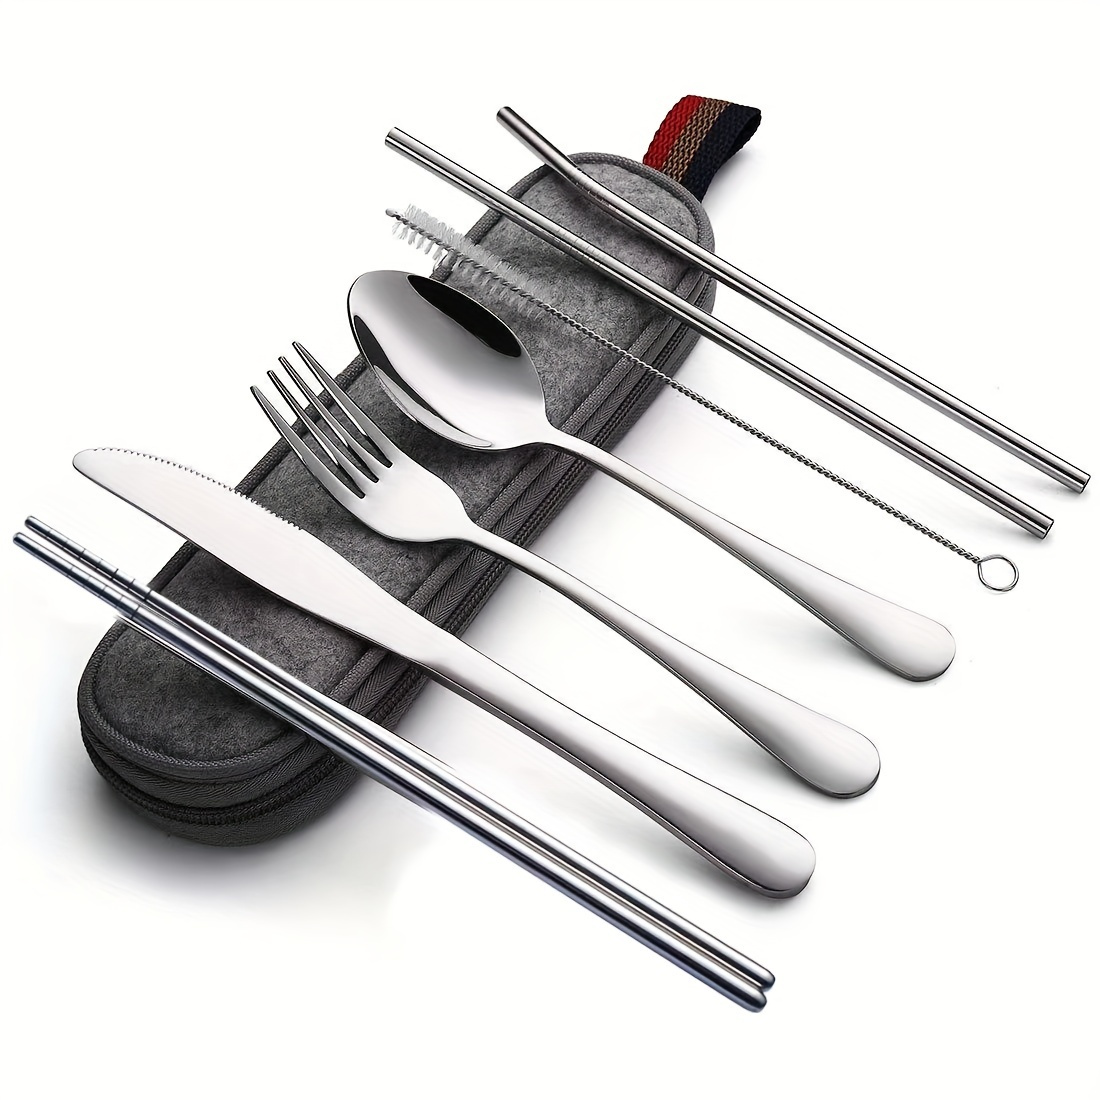 Portable Utensils, Travel Camping Cutlery Set, 10-Piece Including Knif –